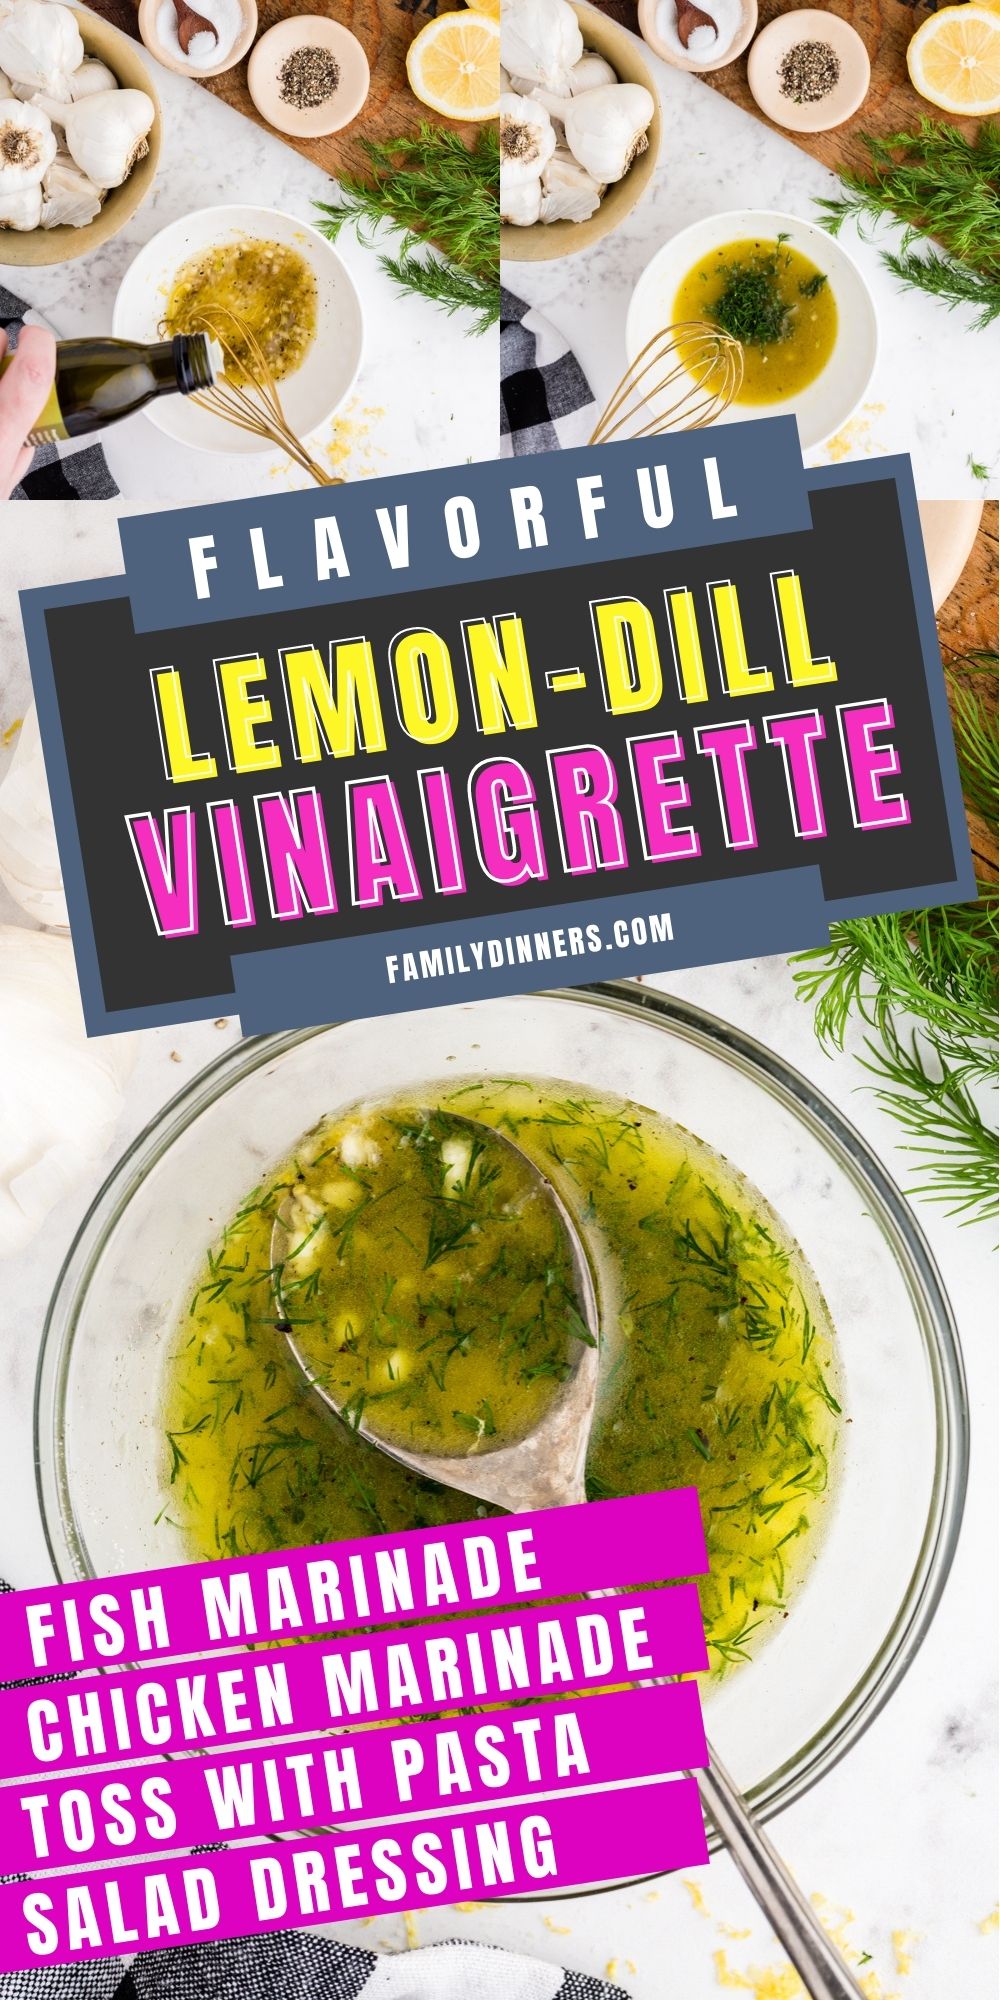 overhead image of lemon dill vinaigrette ingredients including whole garlic in a bowl, sugar in a small bowl, pepper in small bowl, cut lemon, fresh dill and a bowl of ingredients being mixed with gold SPOON: Text says "flavorful lemon-dill vinaigrette - salmon marinade, chicken marinade, toss with pasta, salad dressing